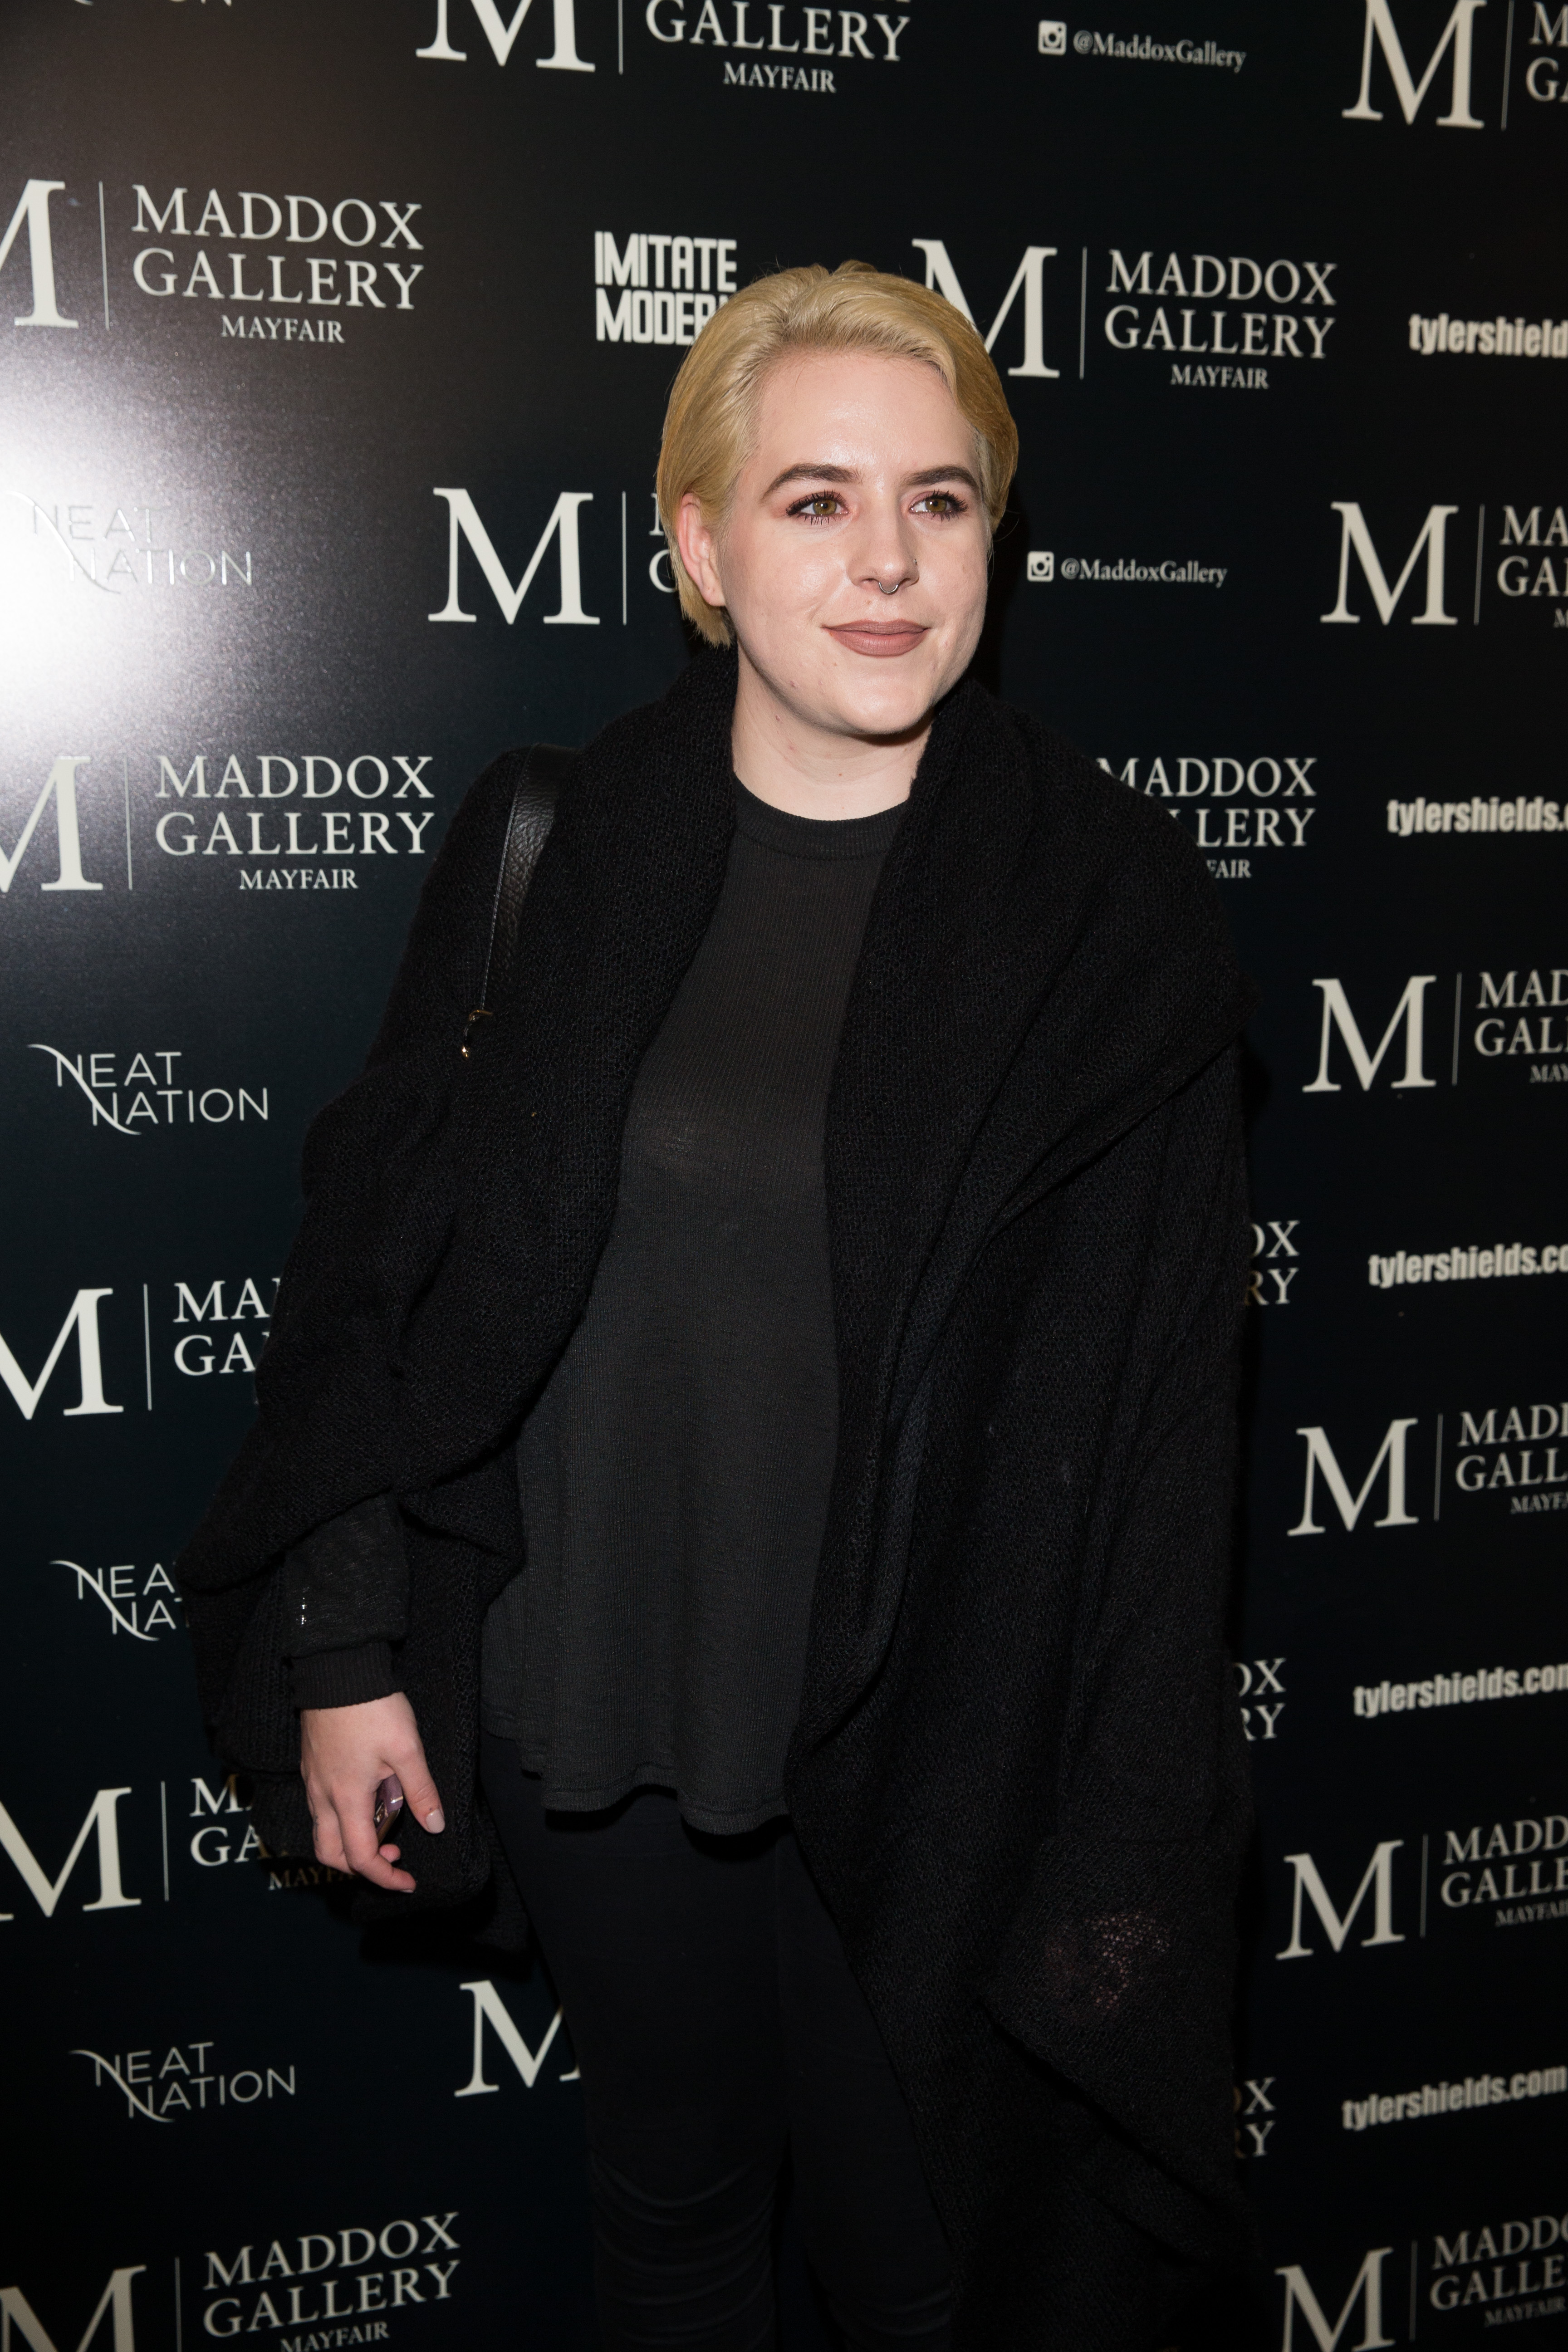 Isabella Cruise at the private viewing for Tyler Shields: Decadence at Maddox Gallery in London, 2016 | Source: Getty Images